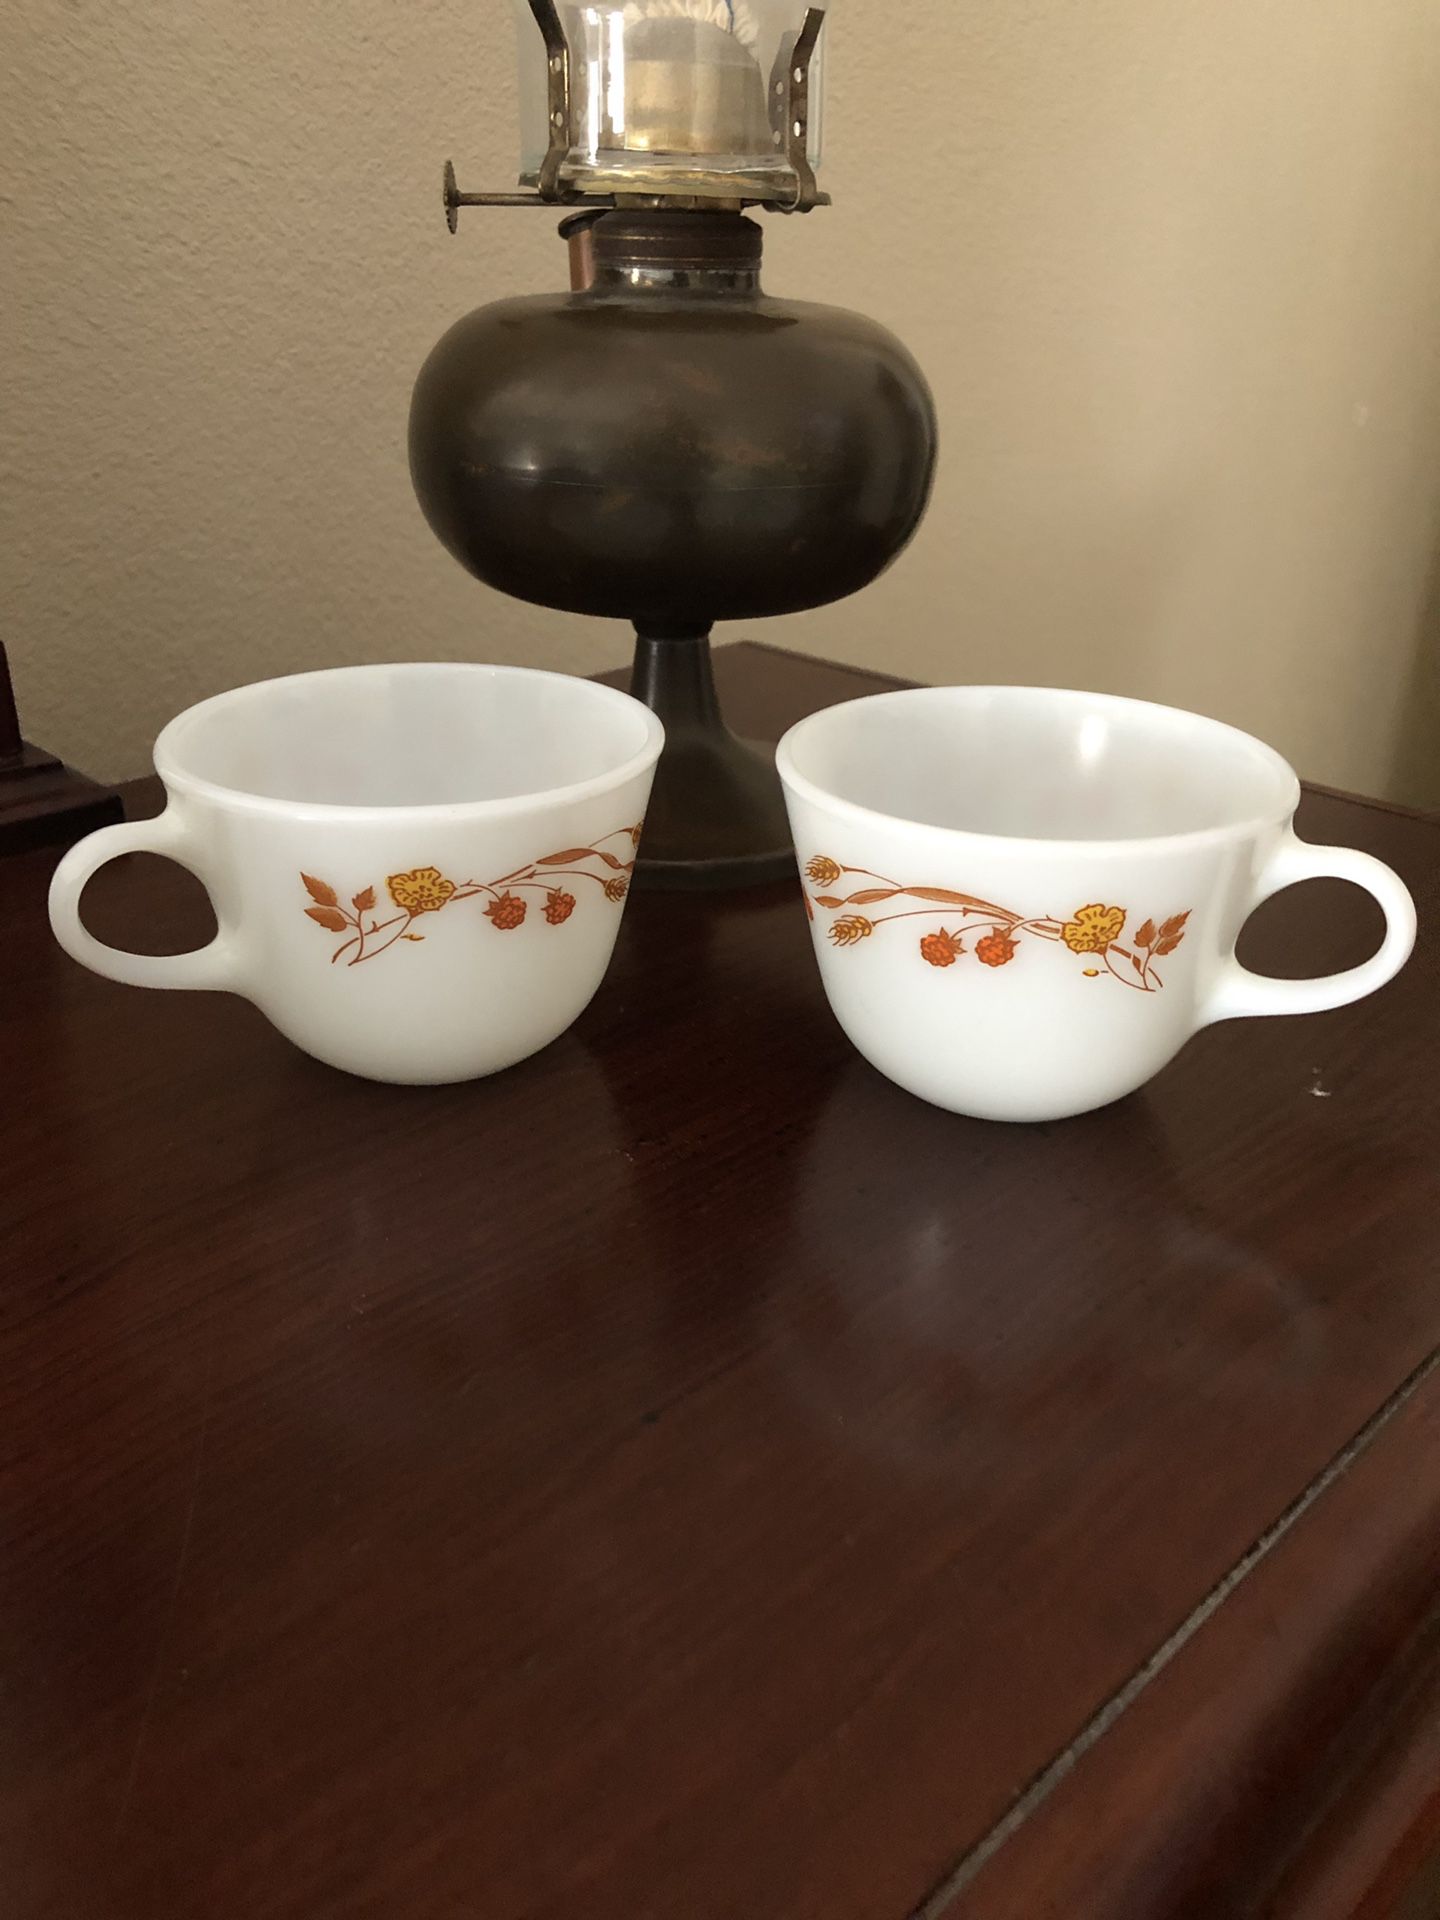 2 - Vintage Pyrex Harvest Home Coffee Cups